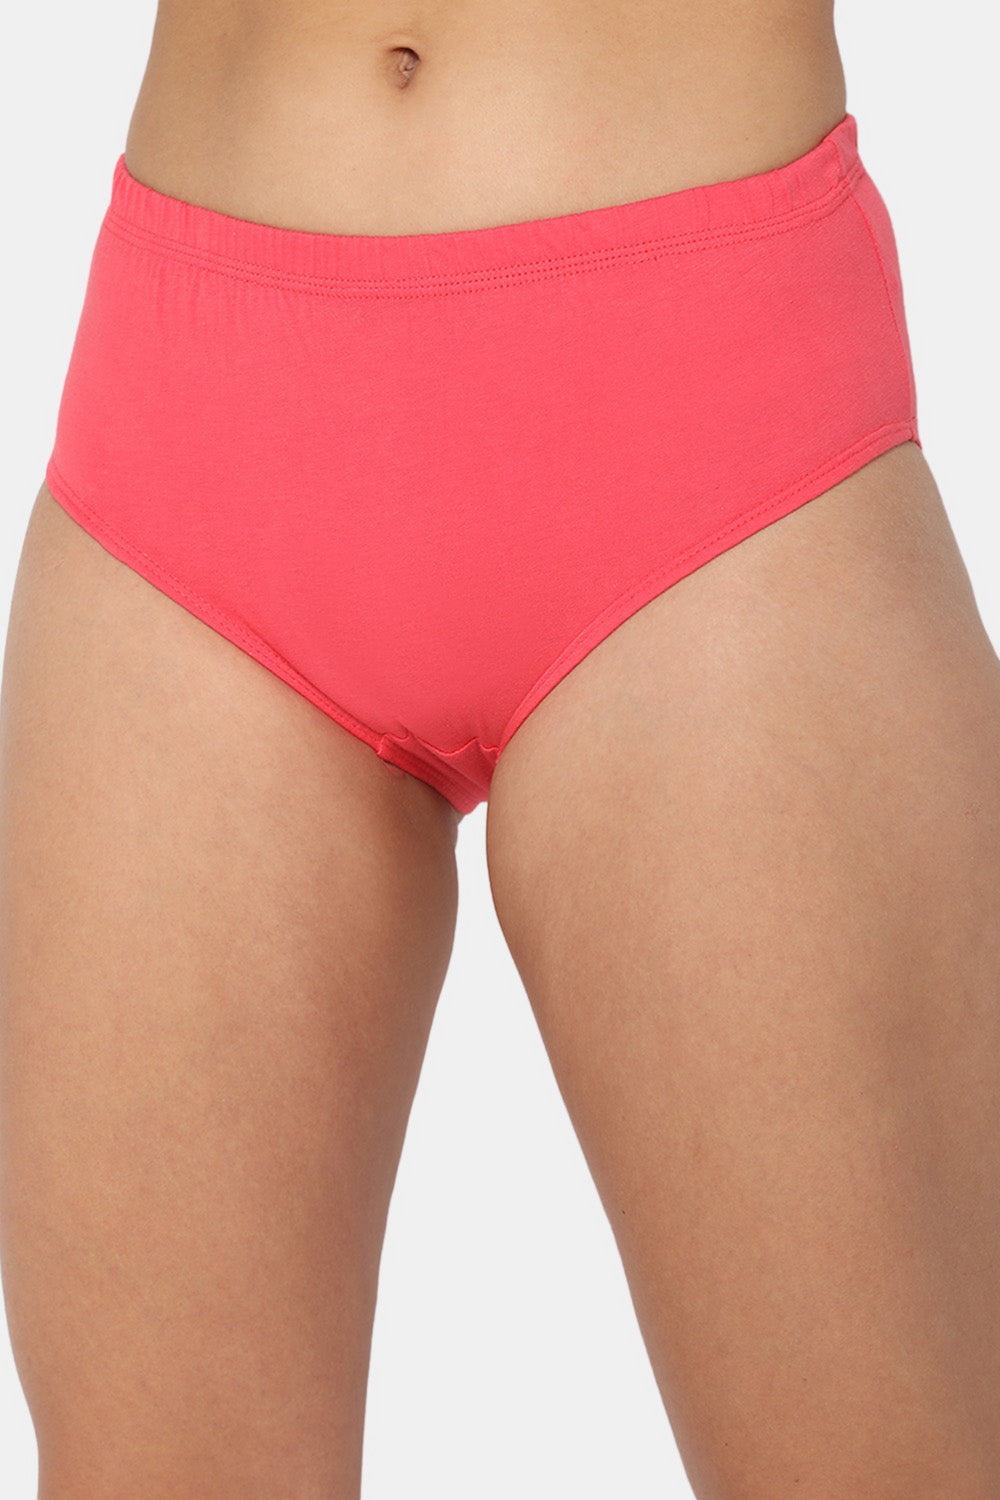 classic combo pack of 2 pink and black color combo panty for women and  girls, made